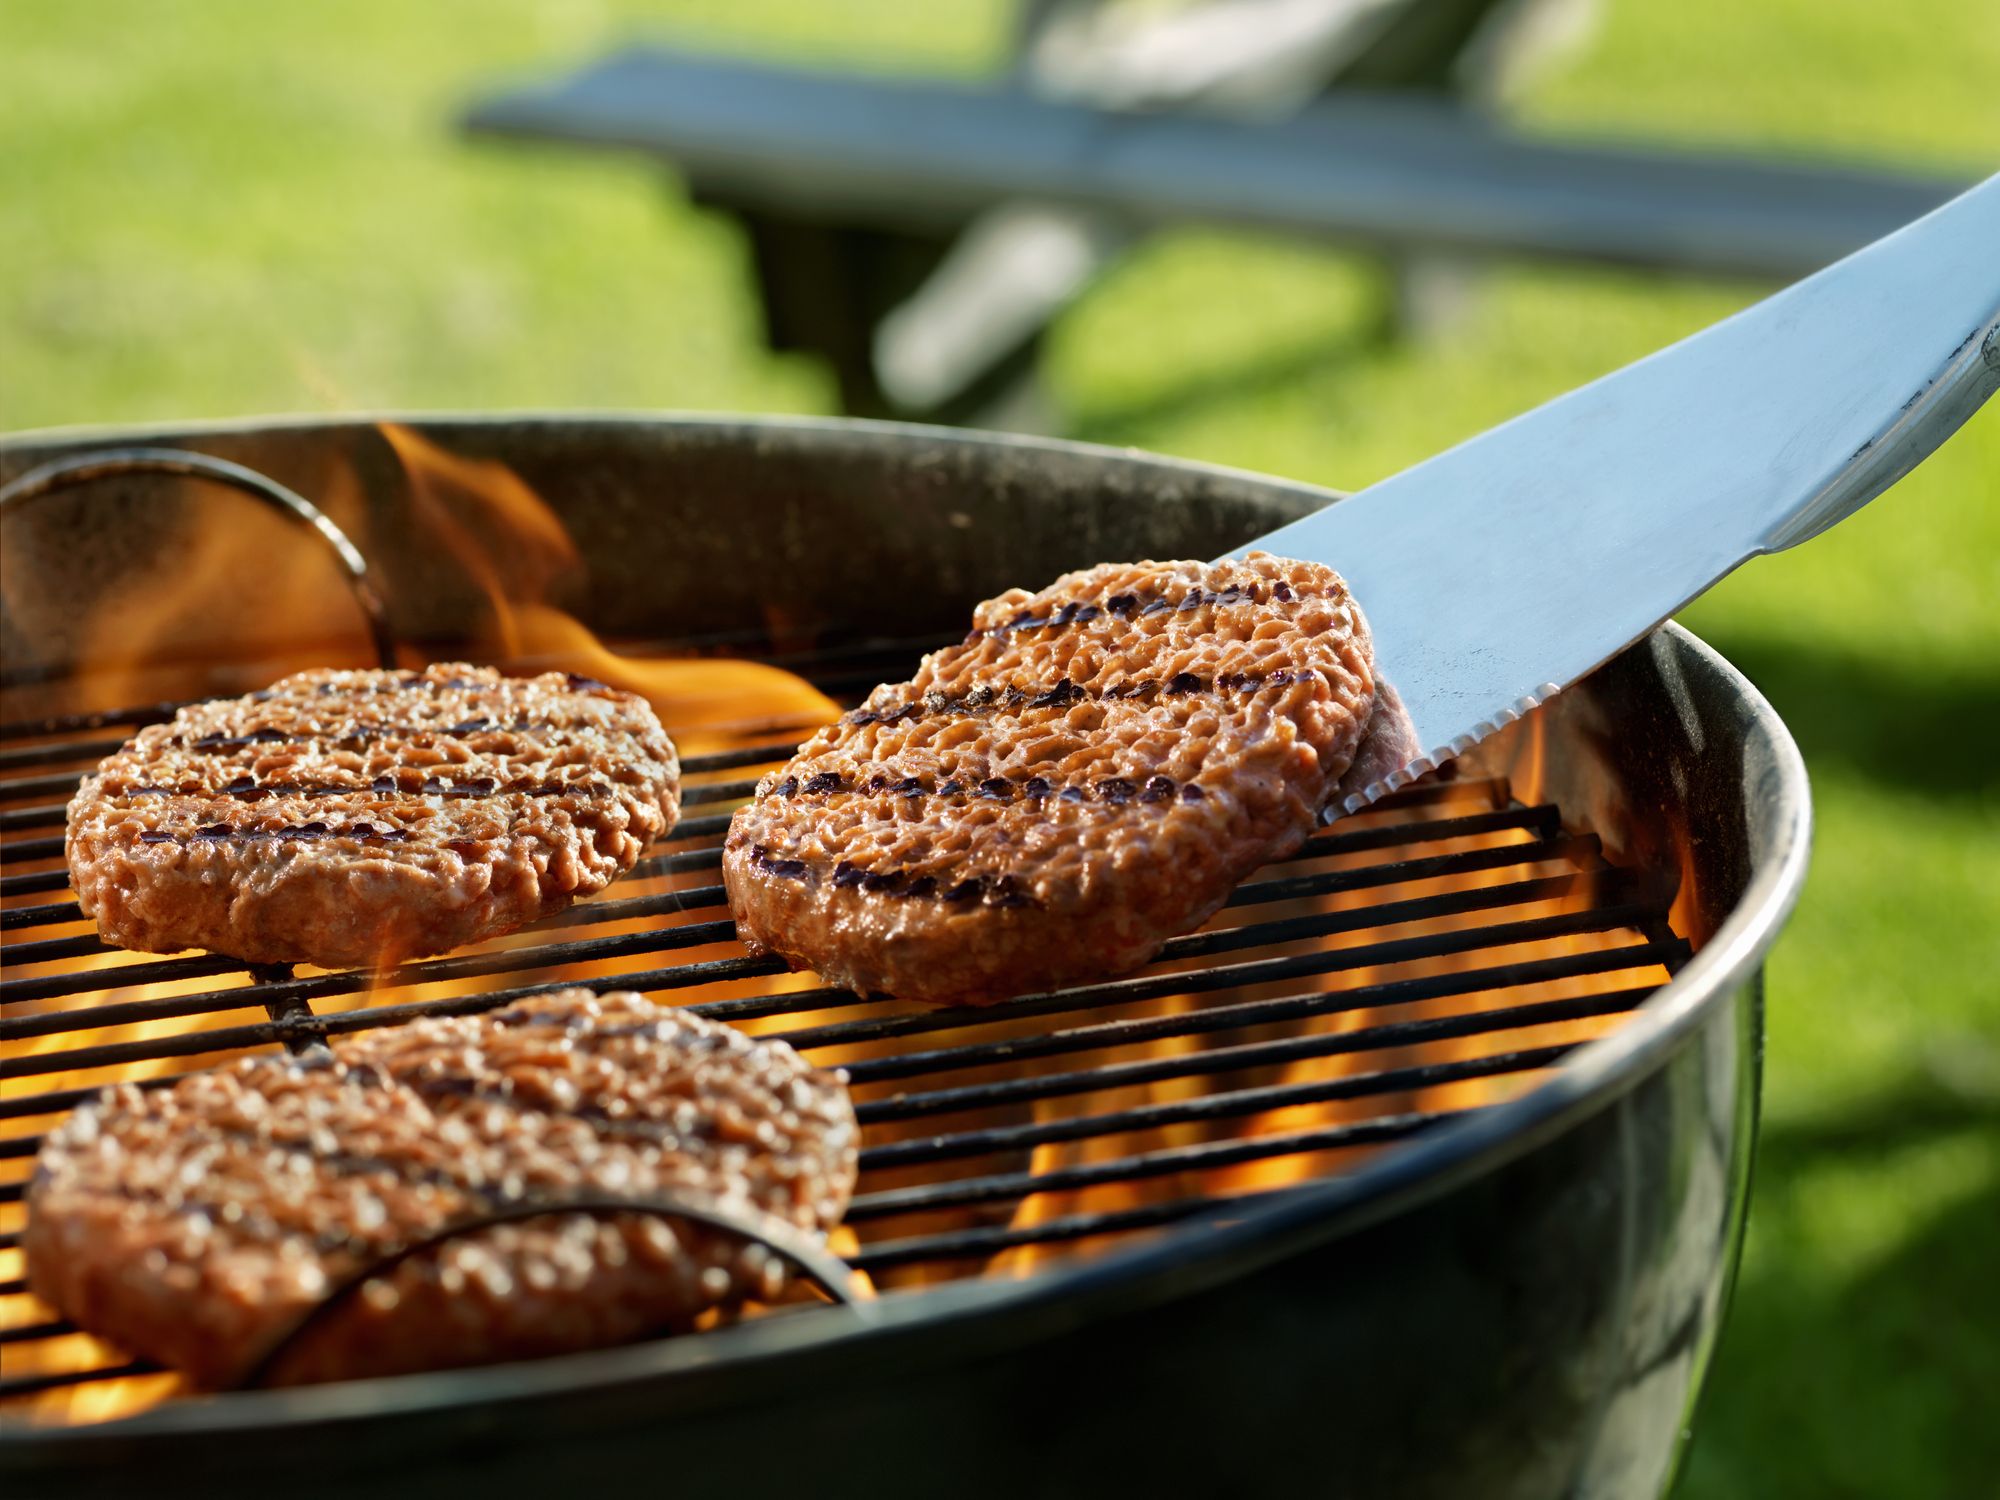 Federaal focus Vrijgevig How Long Does It Take to Grill Burgers? - Grilling Time for Burgers